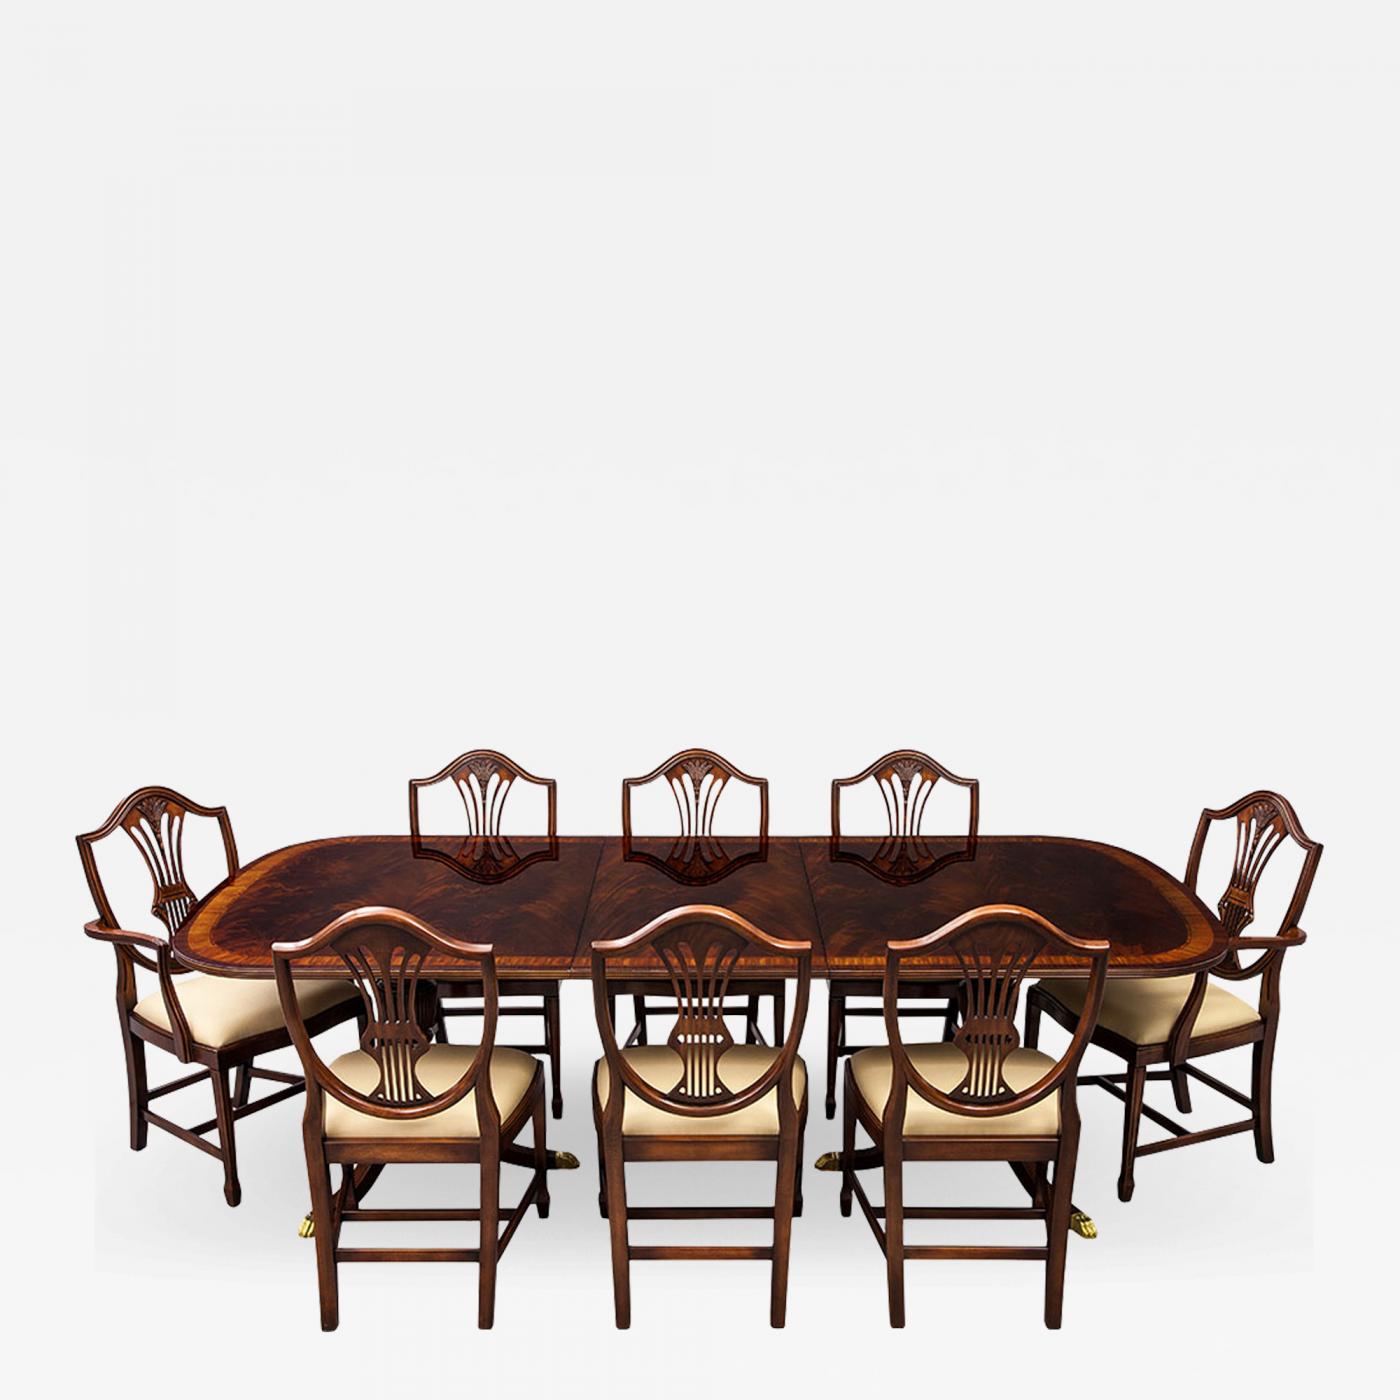 High Quality Flamed Mahogany Duncan Phyfe High Gloss Dining Table And Chairs Set